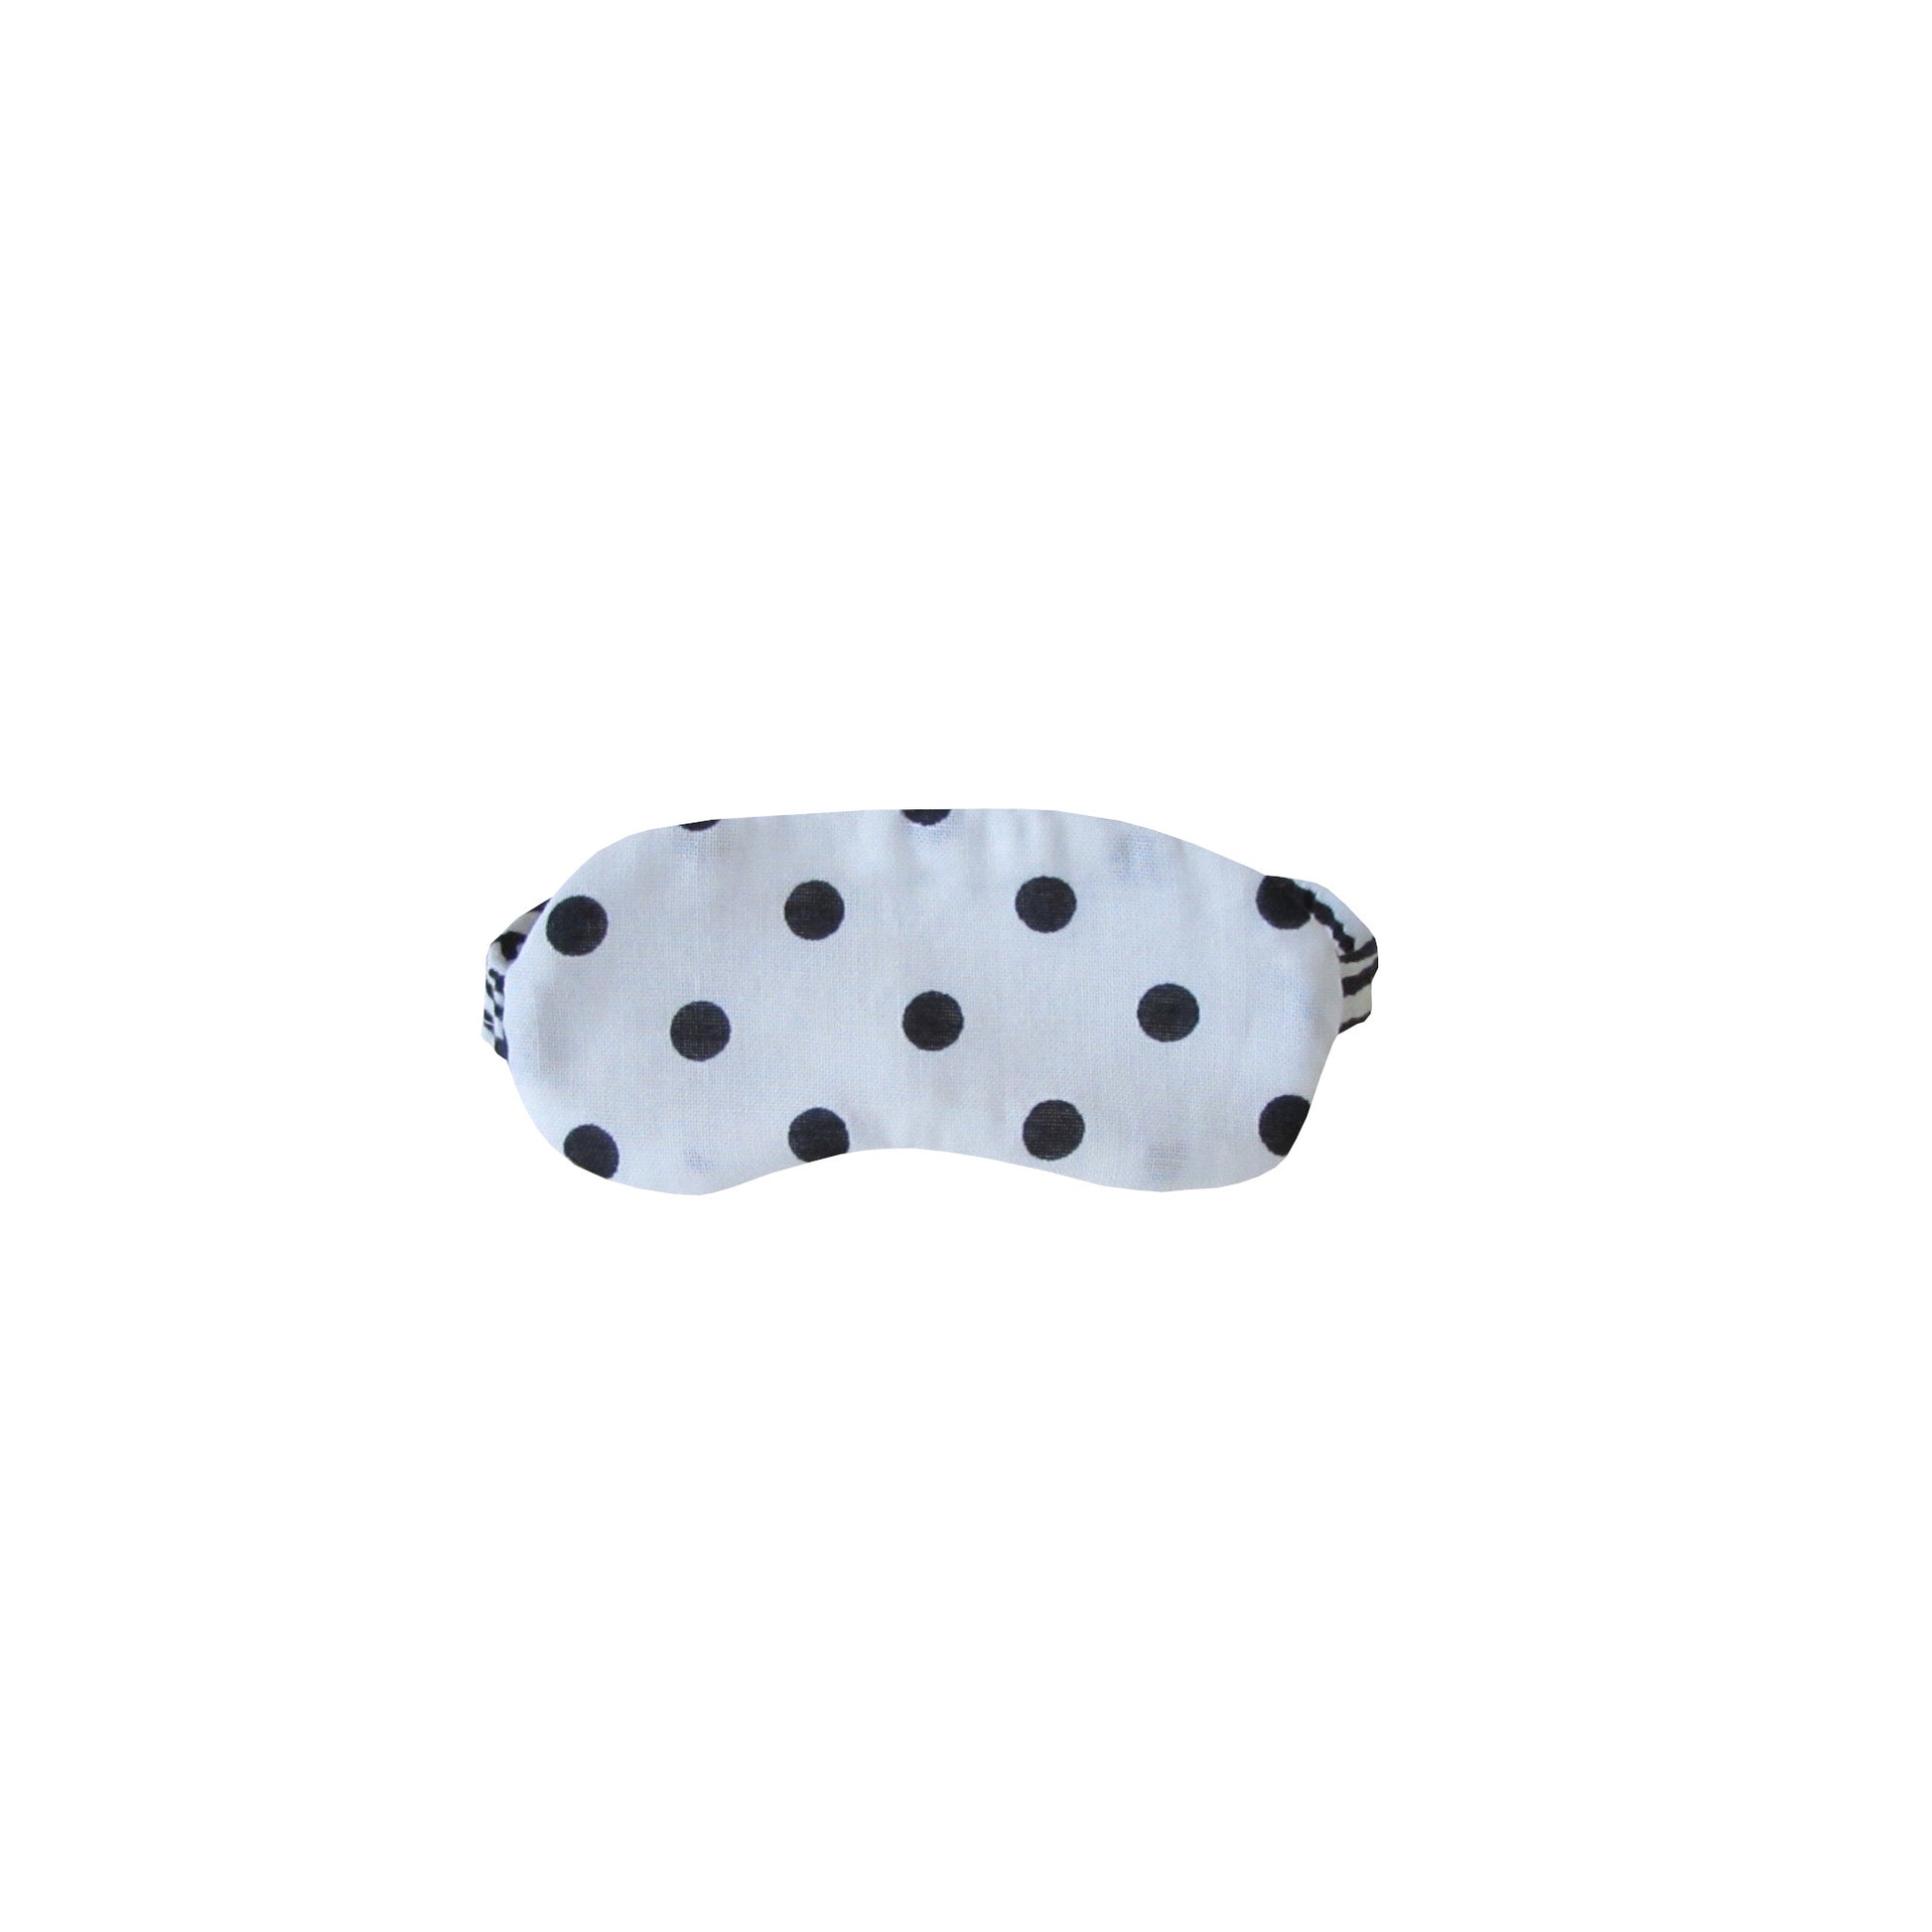 Bllack Dots on White Doll Sleep Mask for 14 1/2-inch dolls